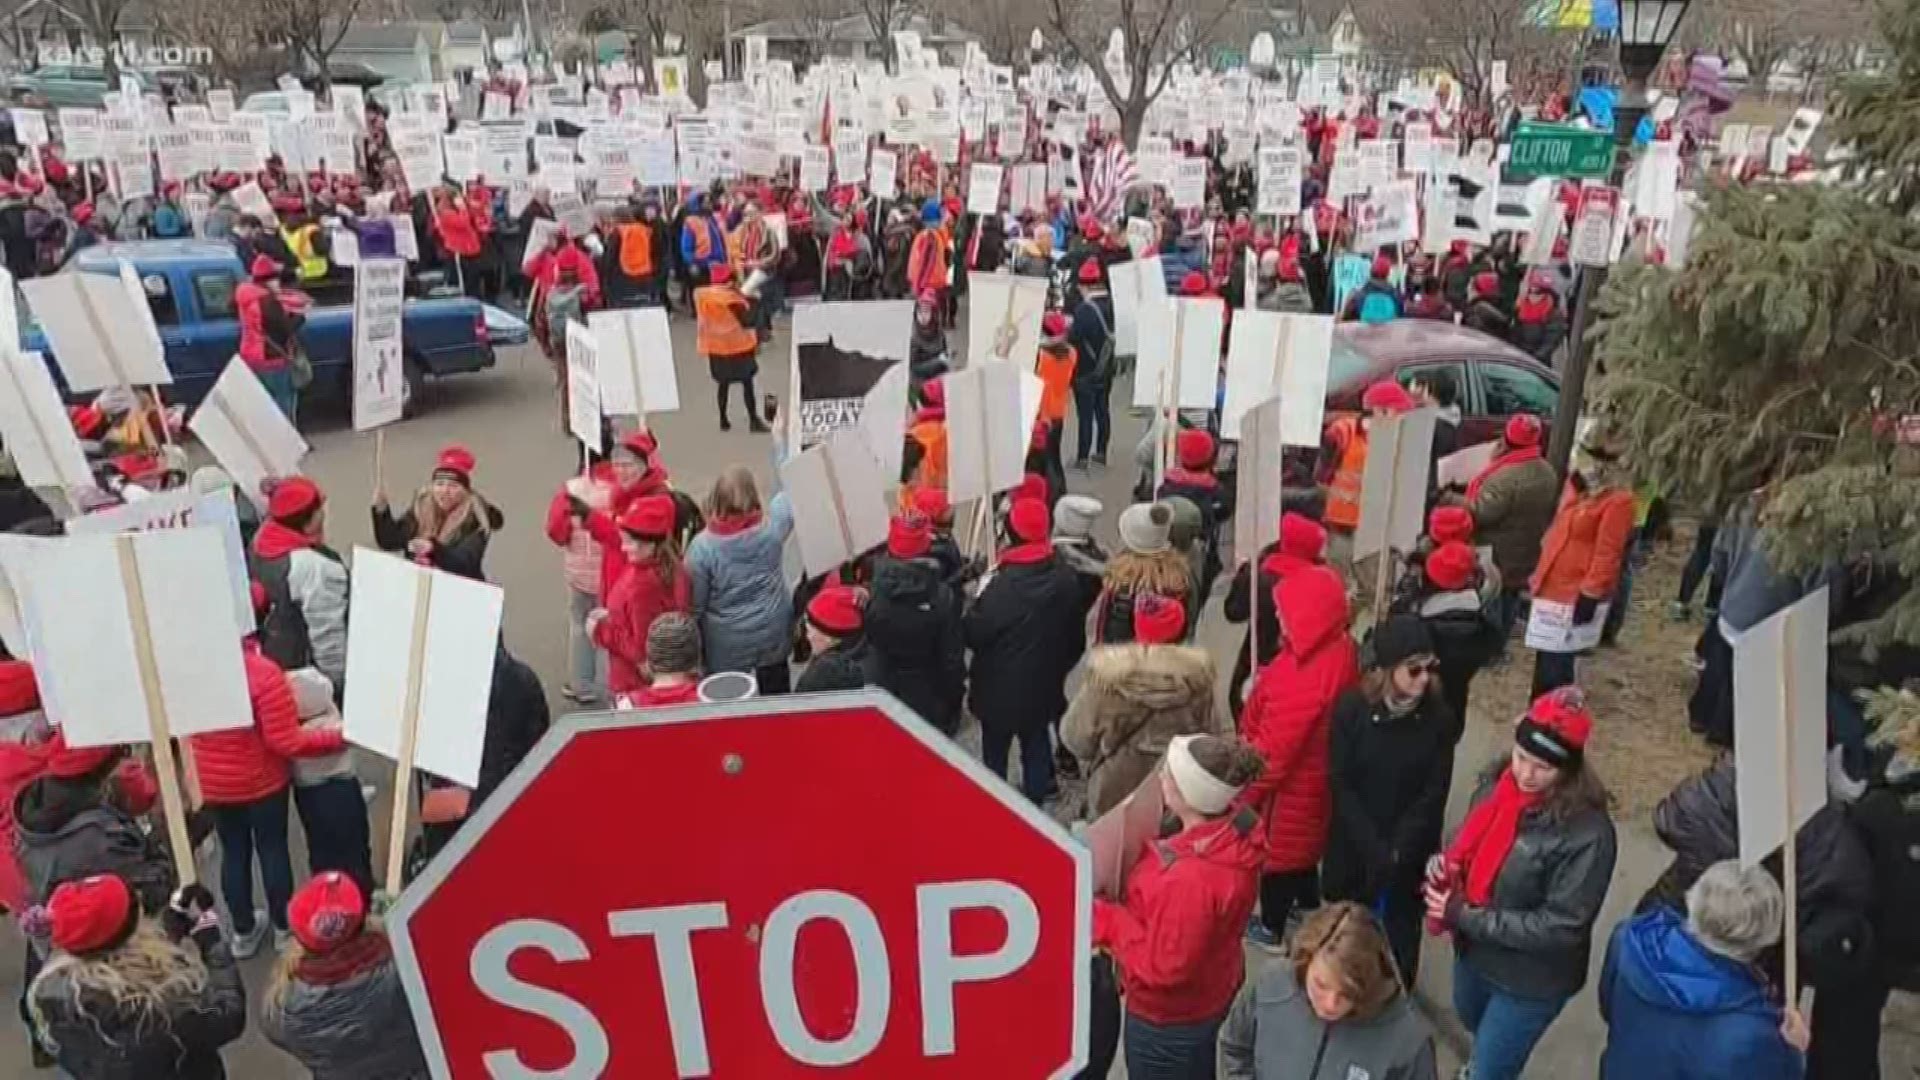 A school spokesperson says the school system cannot provide educational services to students while striking continues, and a deal has not been reached.